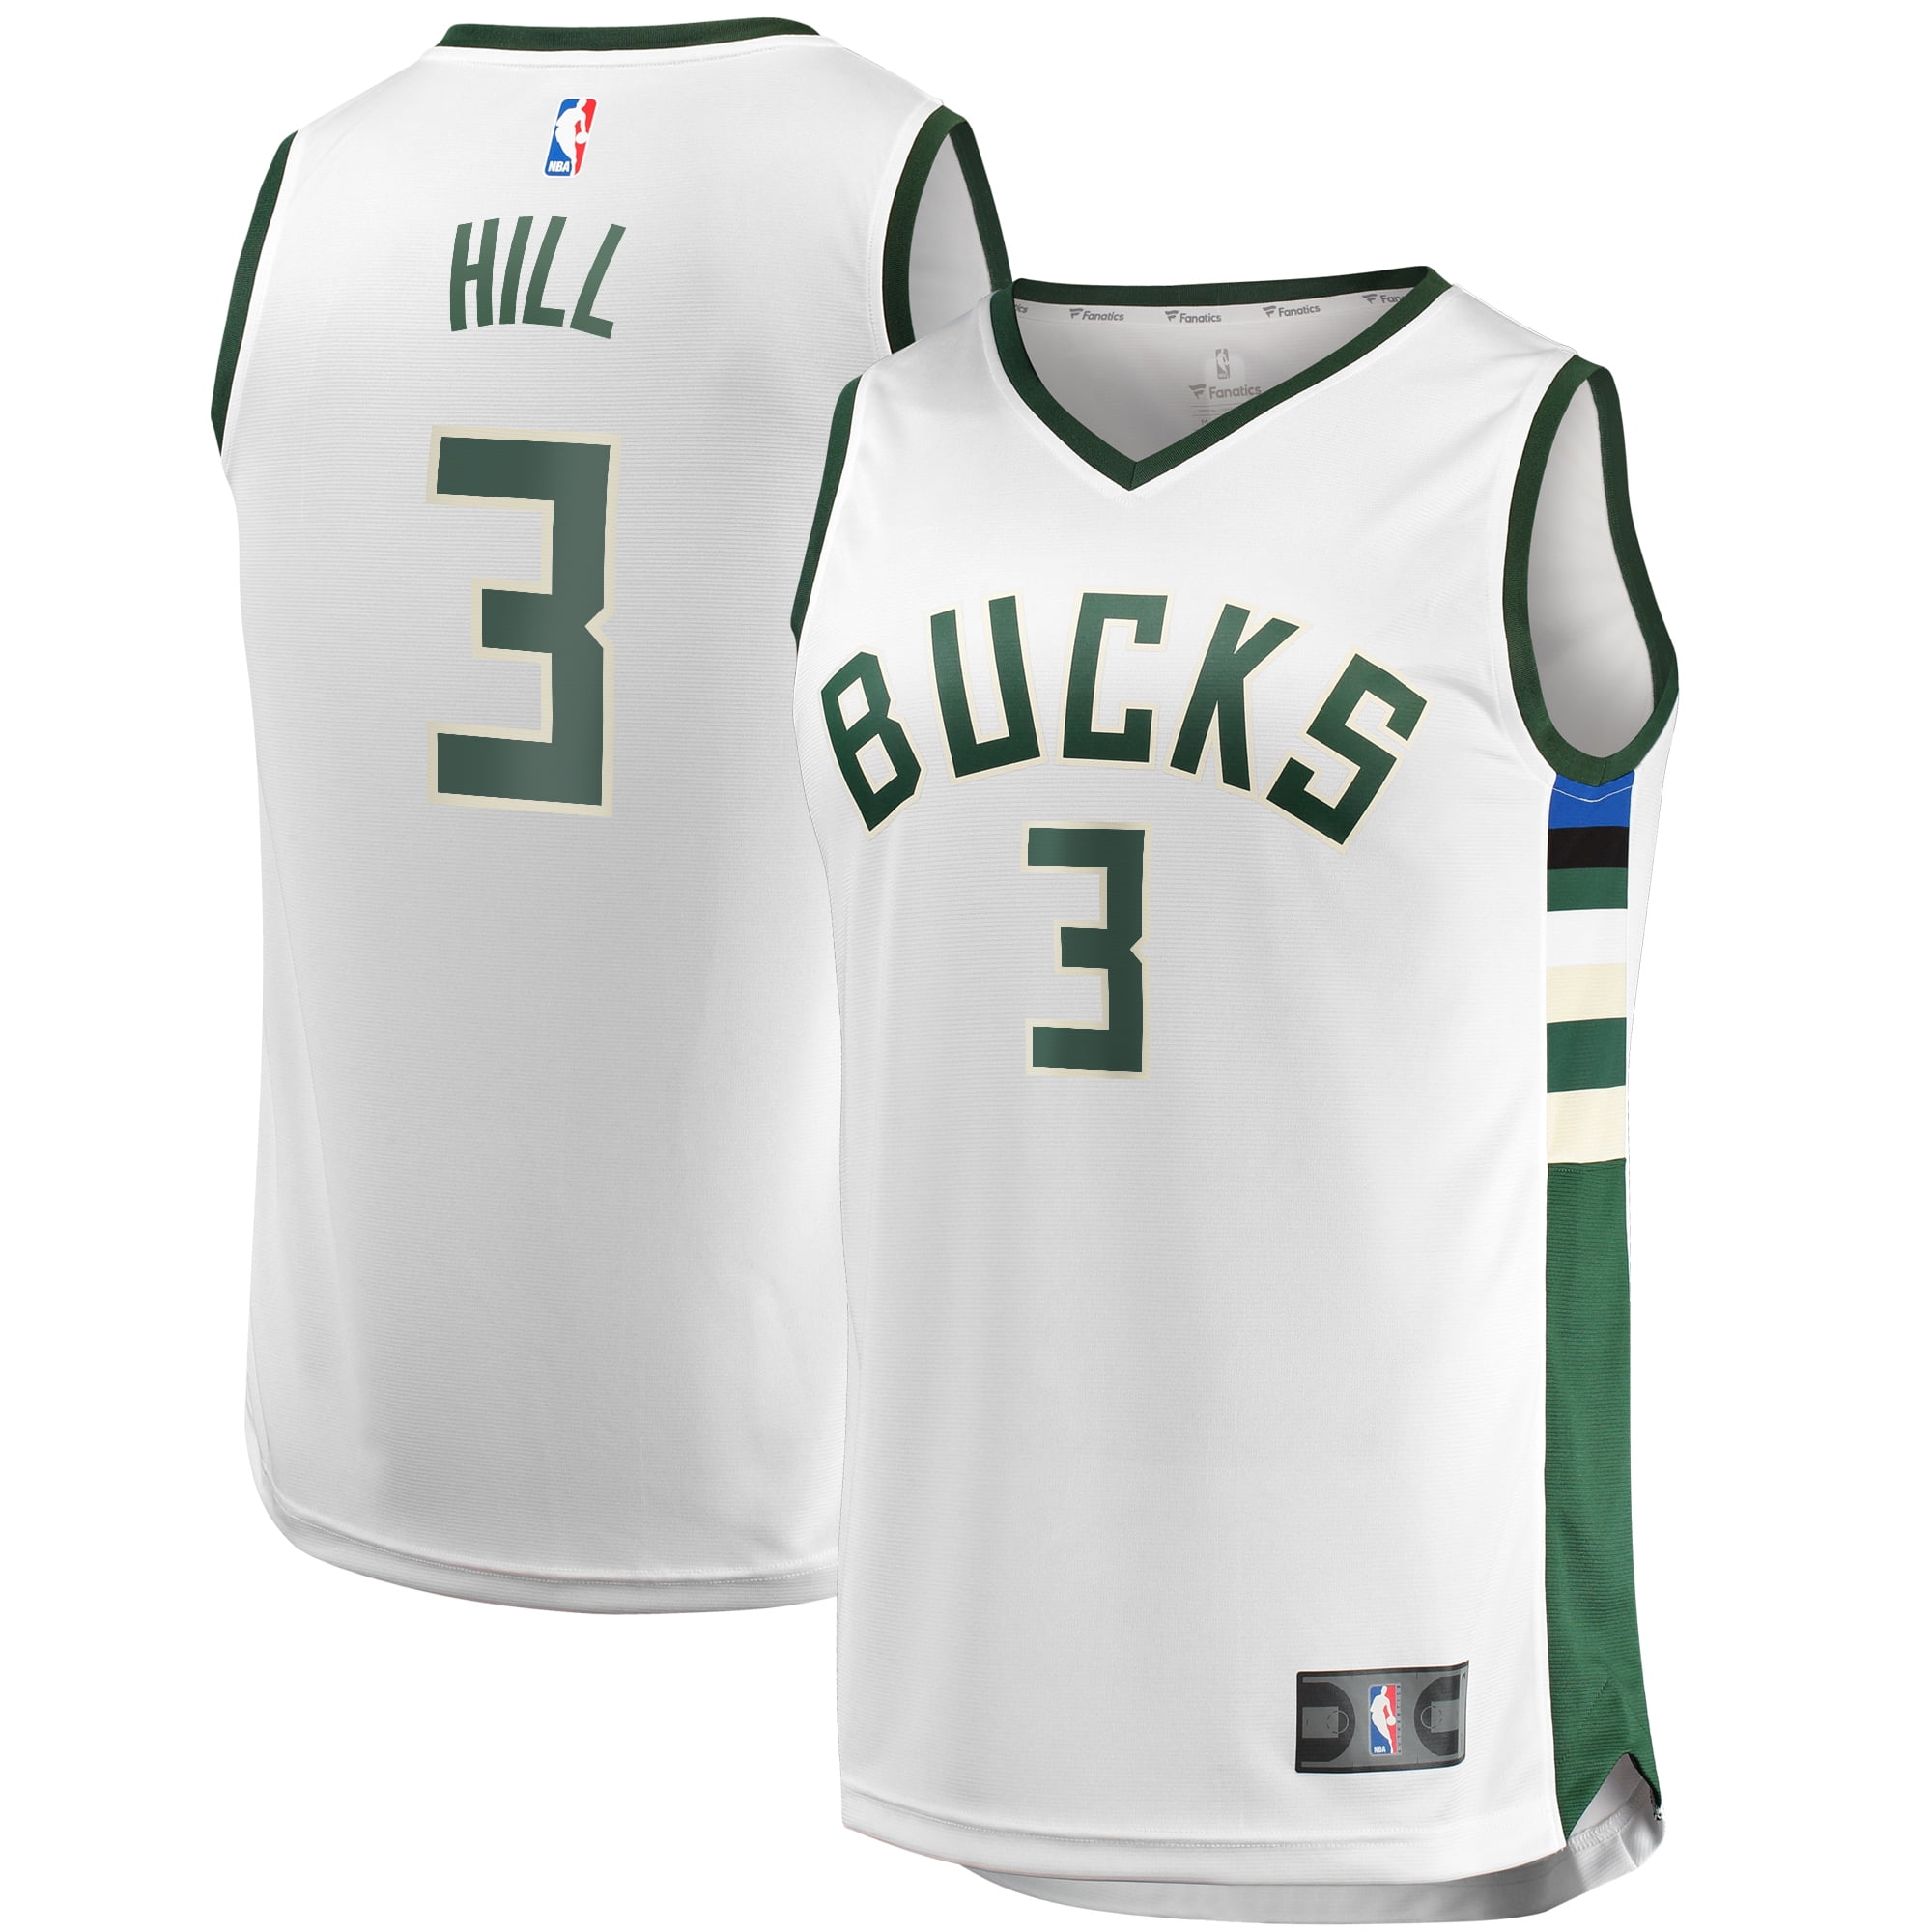 george hill youth jersey